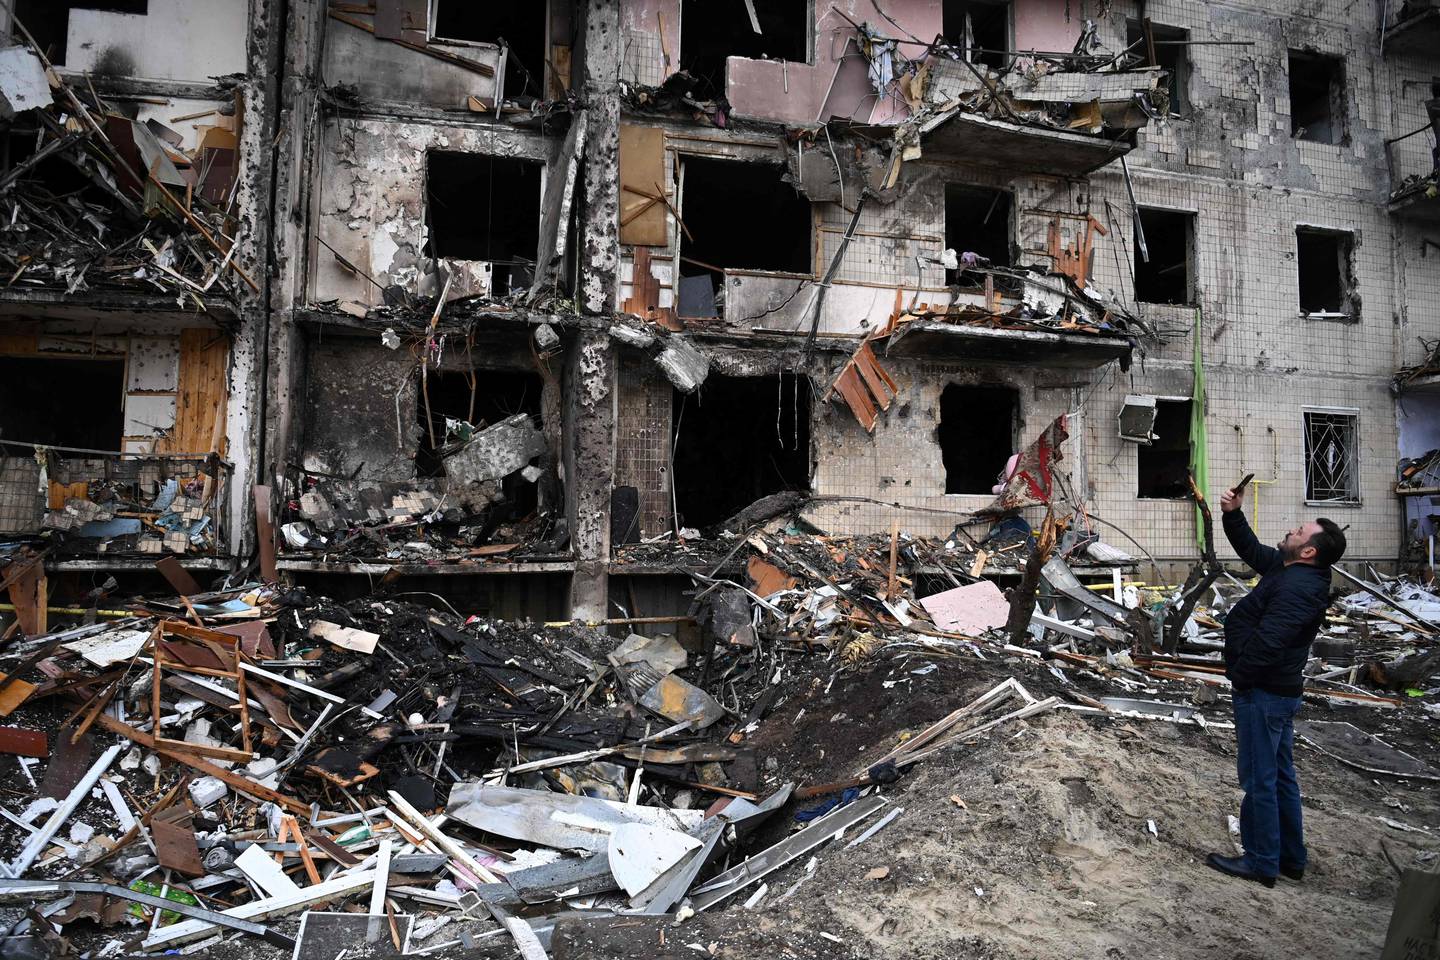 A man takes pictures of a damaged residential building in Kiev, where a military shell allegedly hit, on Thursday. AFP